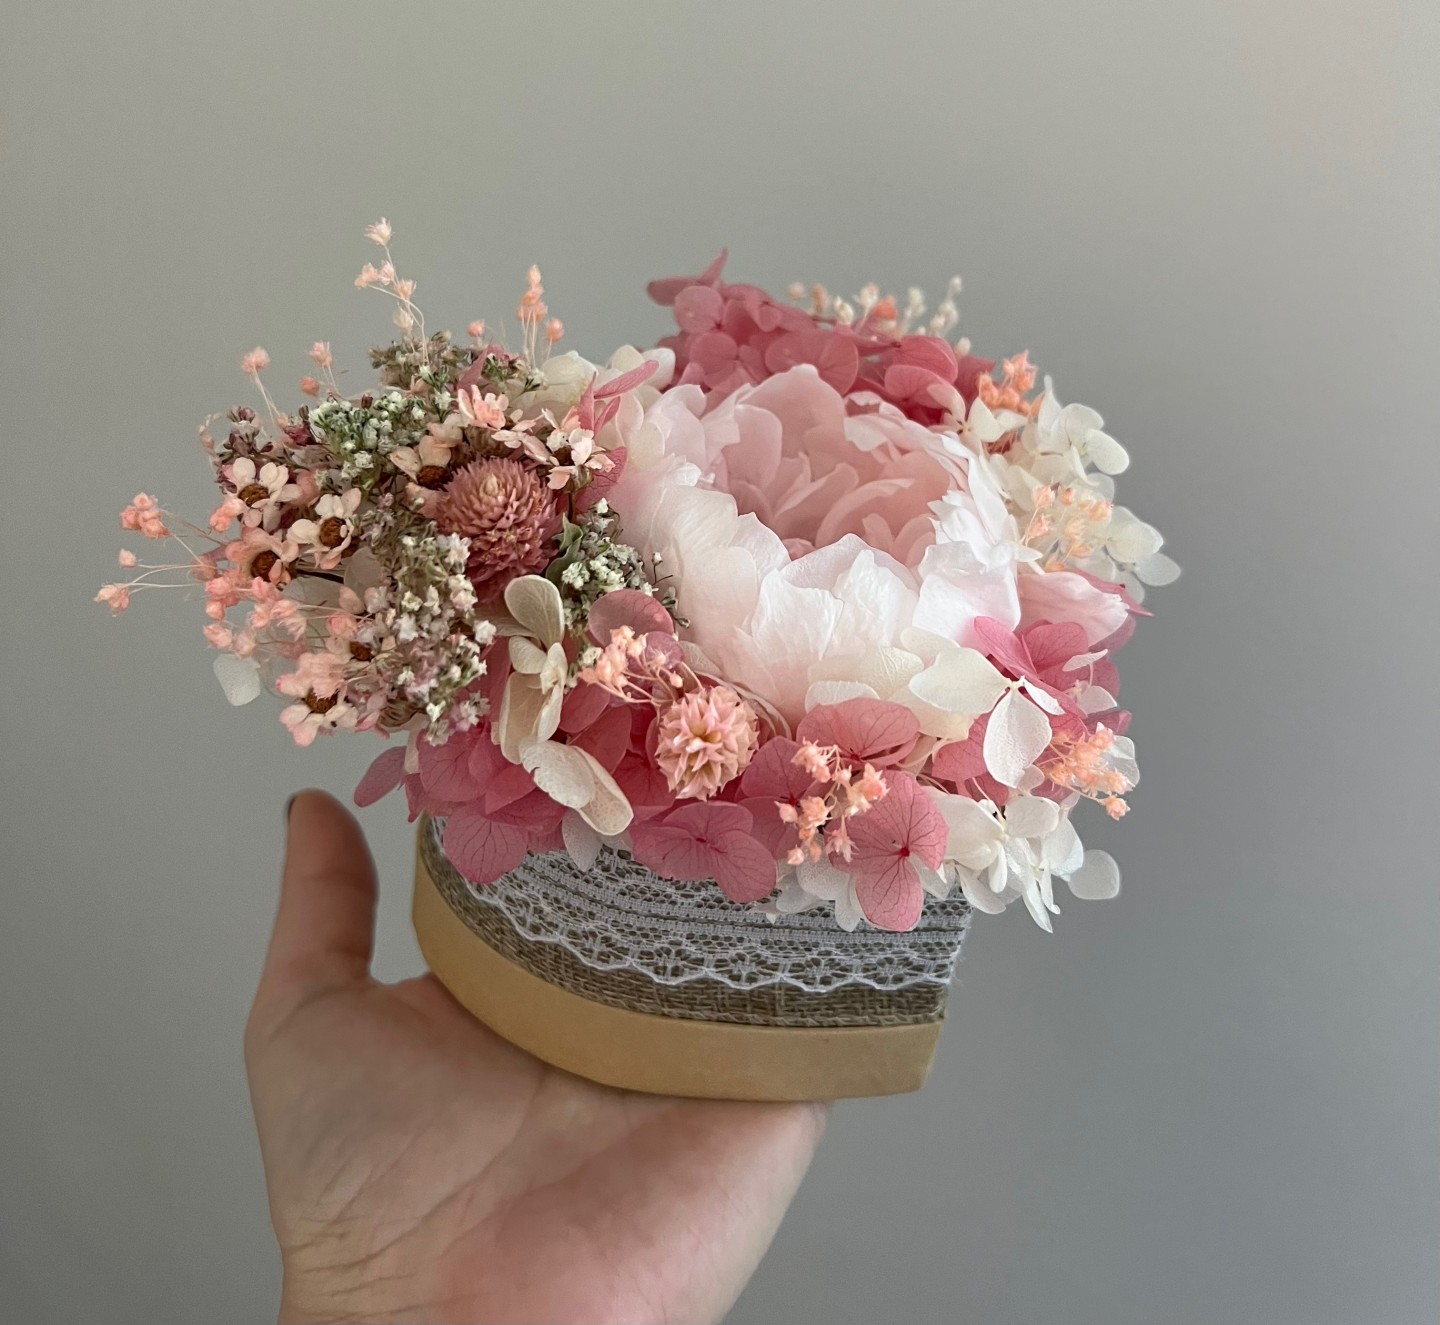 Small heart-shaped box with Preserved Peony